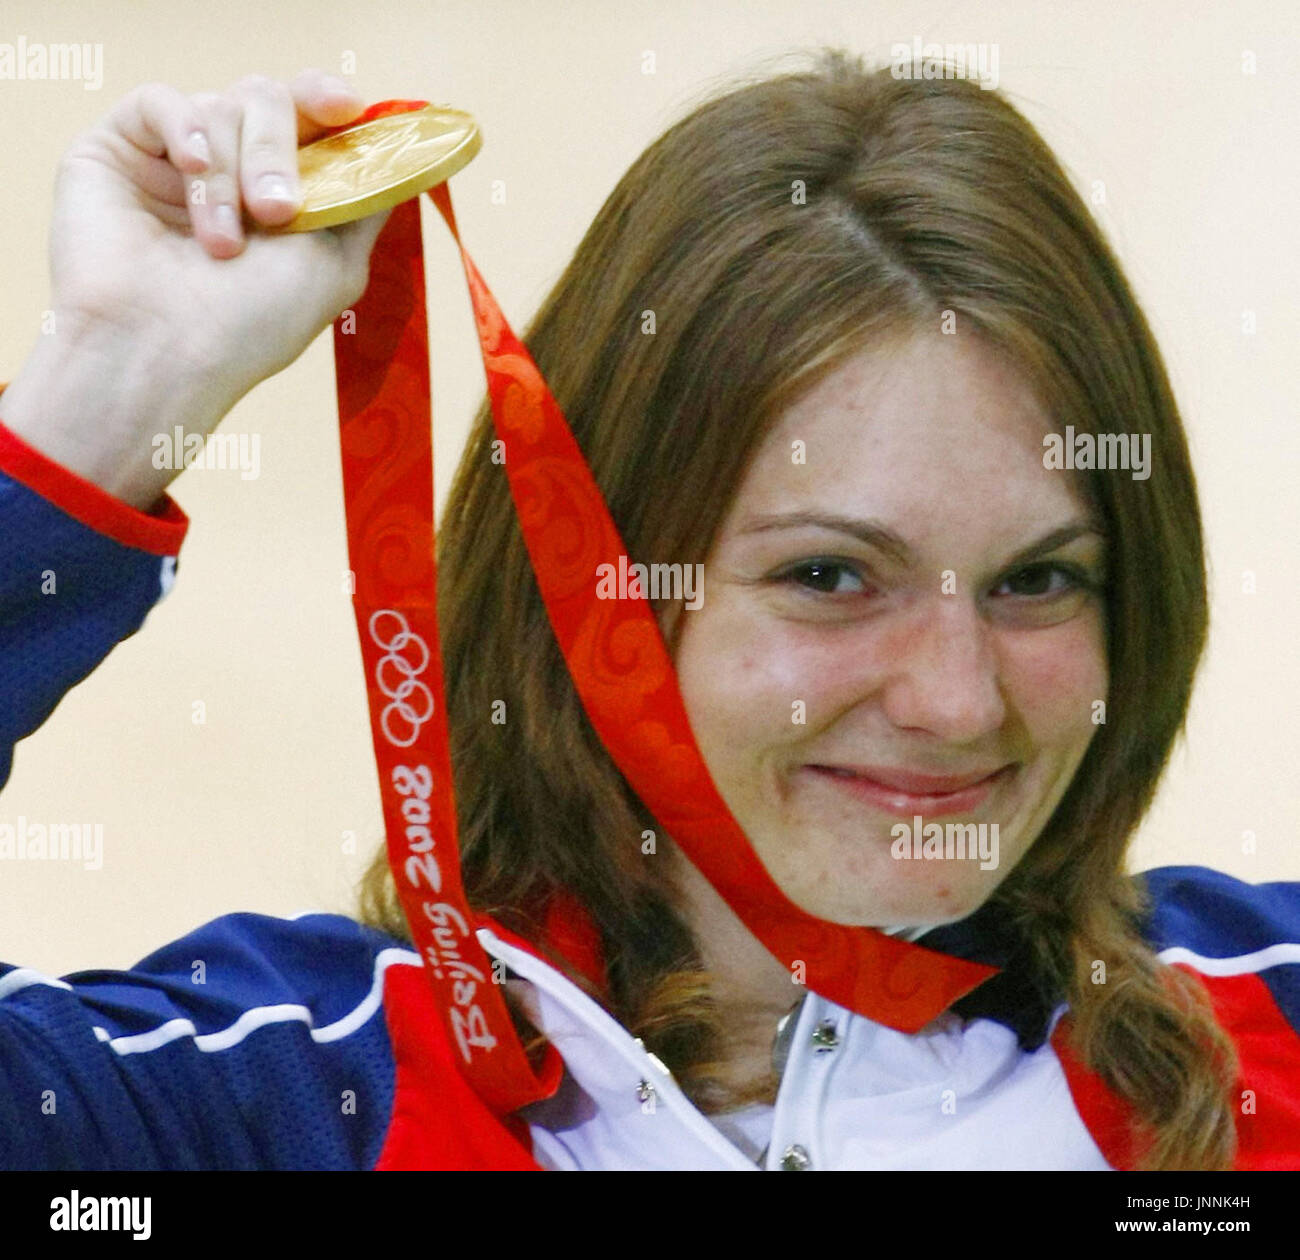 Beijing China Athens Olympics Bronze Medalist Katerina Emmons Of The Czech Republic Shows Off 